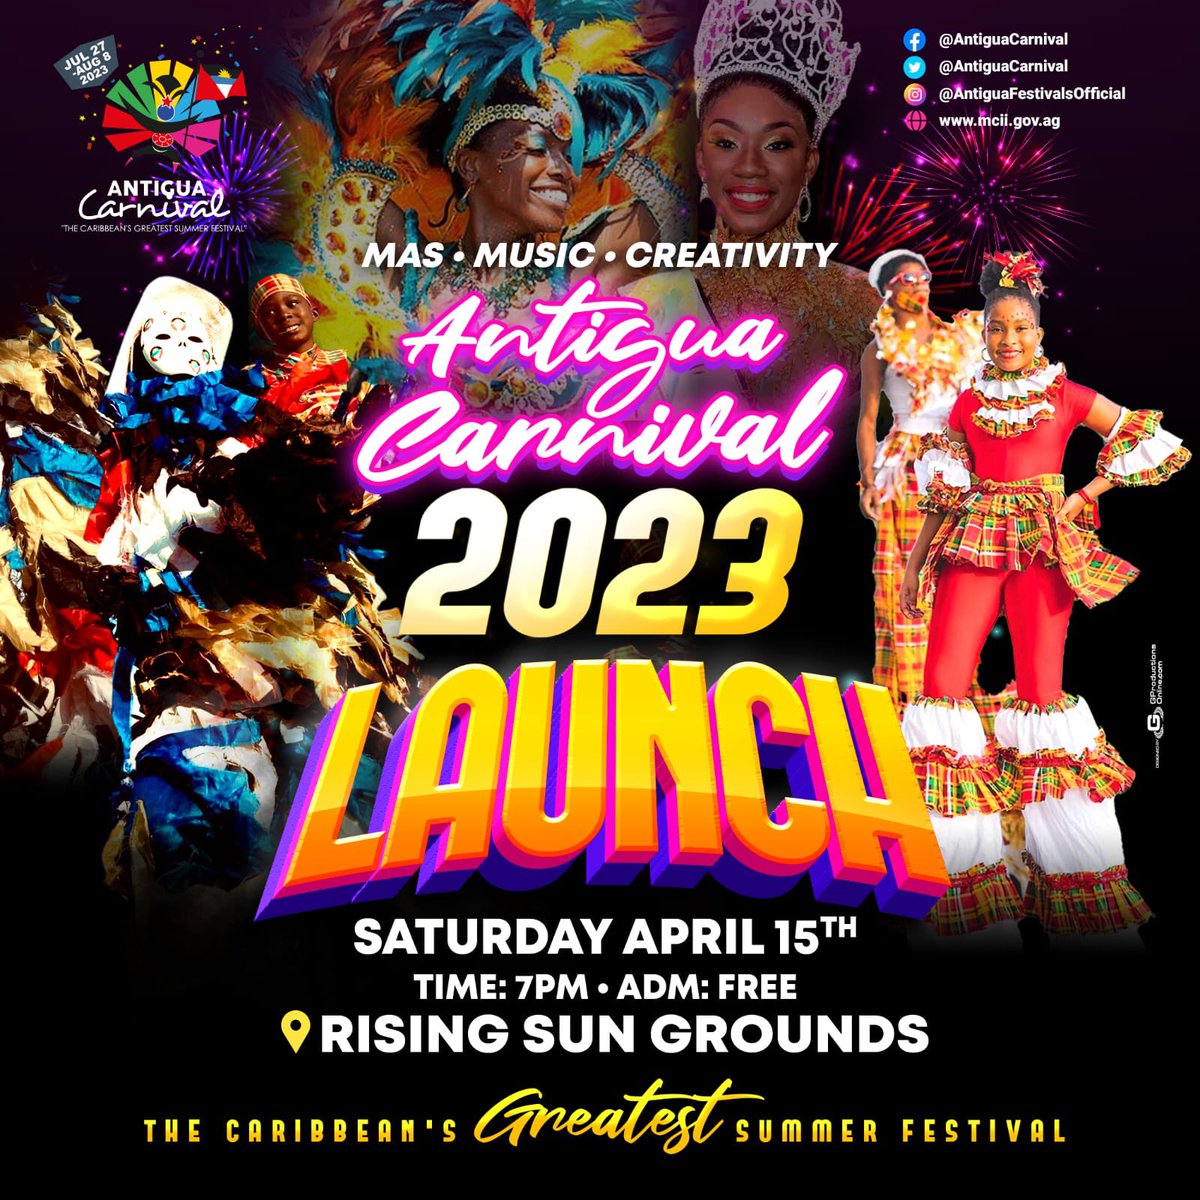 The real action goes down at The OFFICIAL LAUNCH OF THE CARIBBEAN'S GREATEST SUMMER FESTIVAL - ANTIGUA CARNIVAL 2023!!!
#MasMusicCreativityAntiguaCarnival2023
#WereadyForTheRoad
#CaribbeansGreatestSummerFestival 
#LoveAntiguaBarbuda
#AreYouReady
#CarnivalCountdown